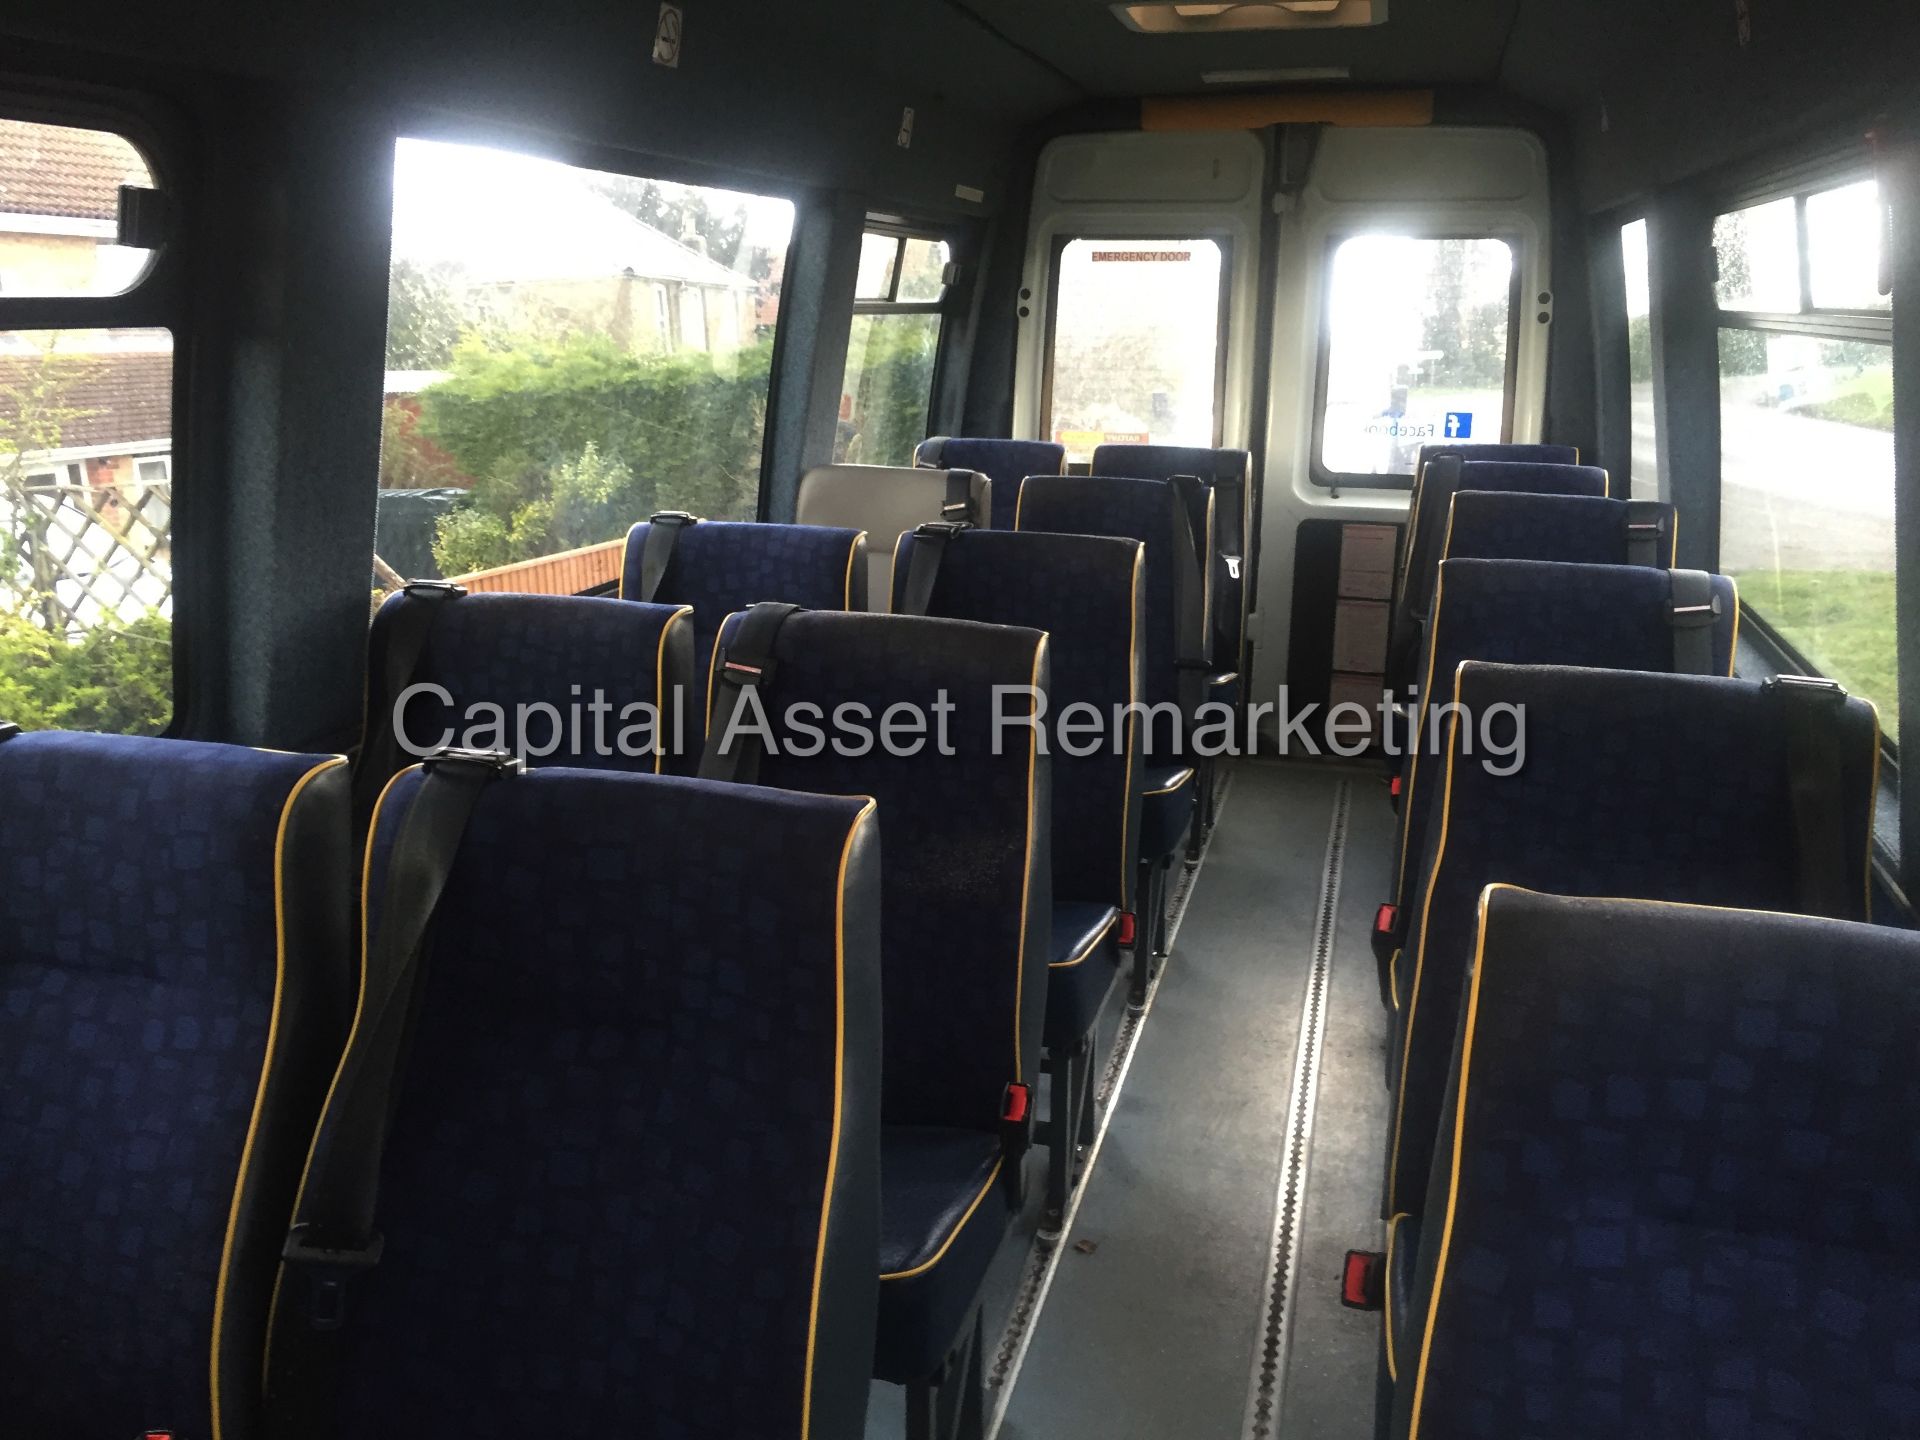 (ON SALE) IVECO DAILY 50C14 '17 SEATER MINI-BUS' (2006) 3.0 'DIESEL' - 150 BHP - 6 SPEED (NO VAT) - Image 17 of 20